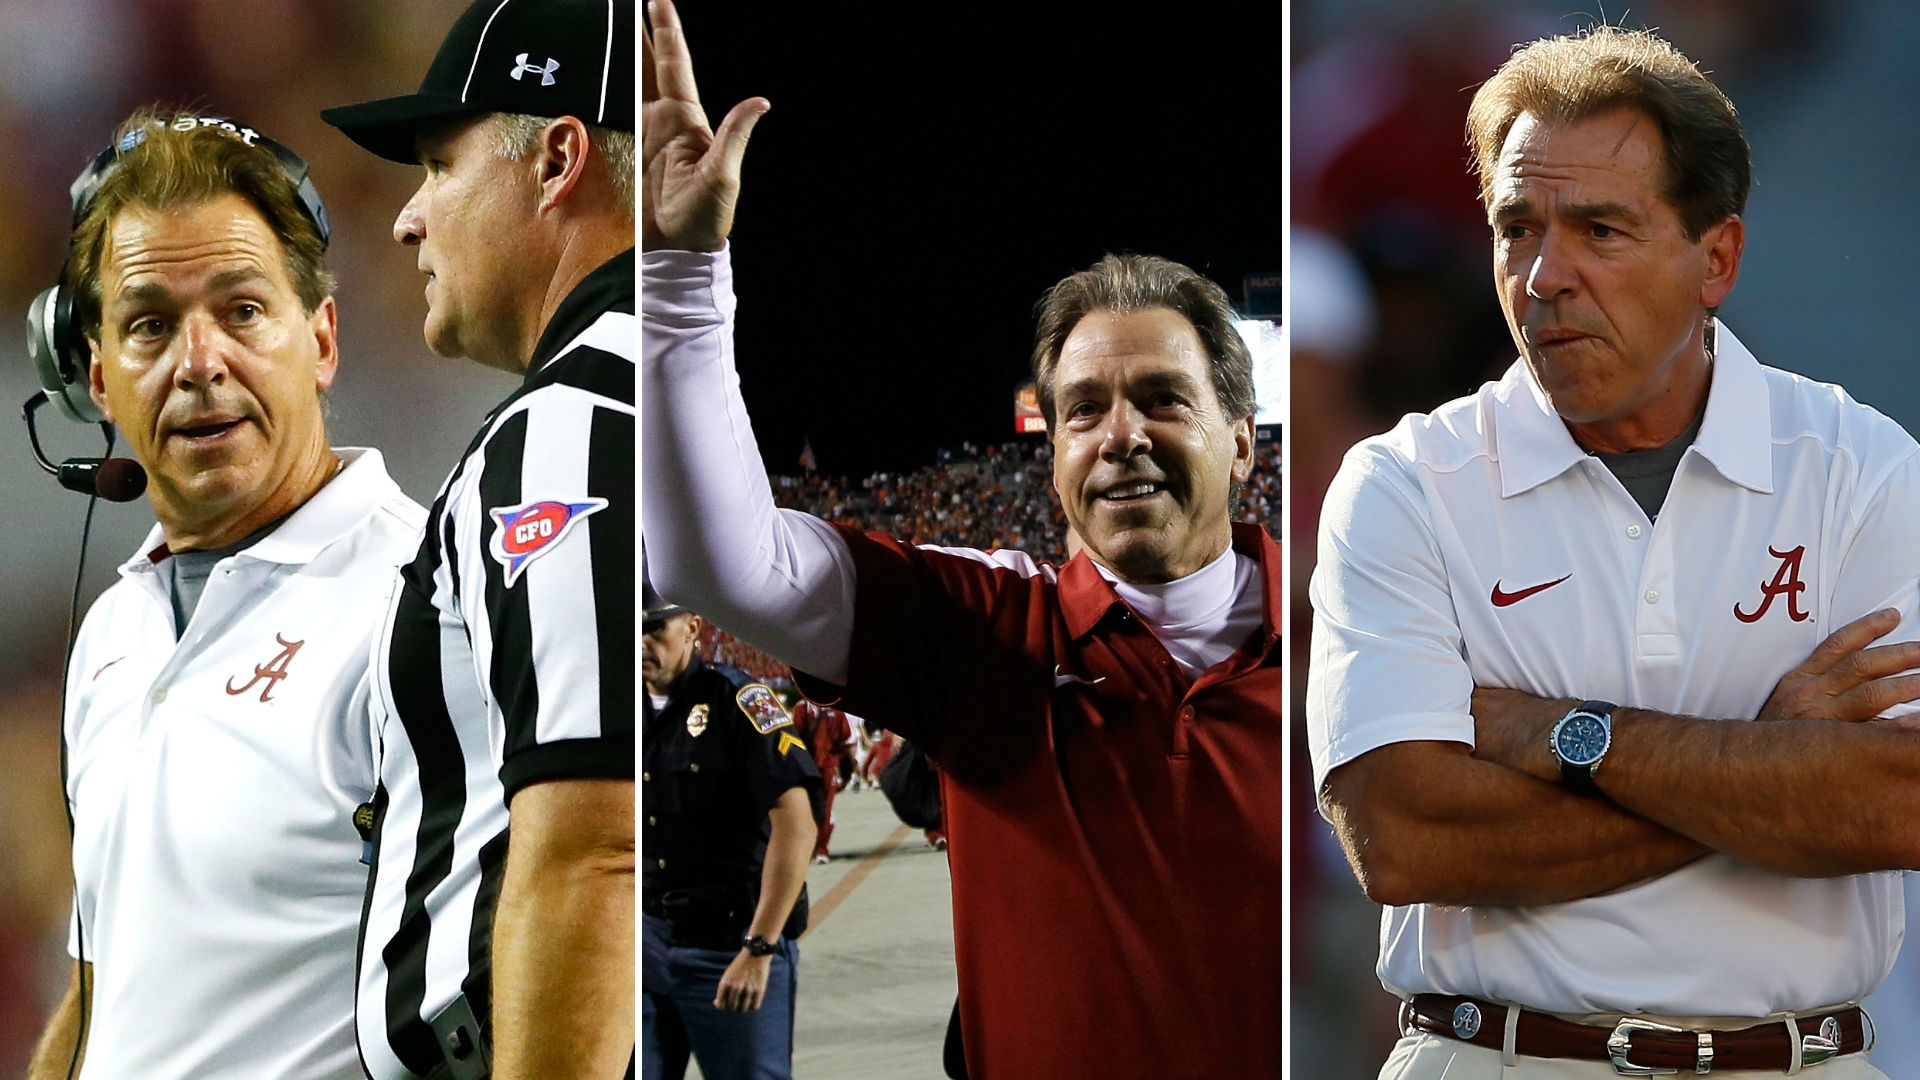 10 reasons you should love (or at least like a little) Nick Saban